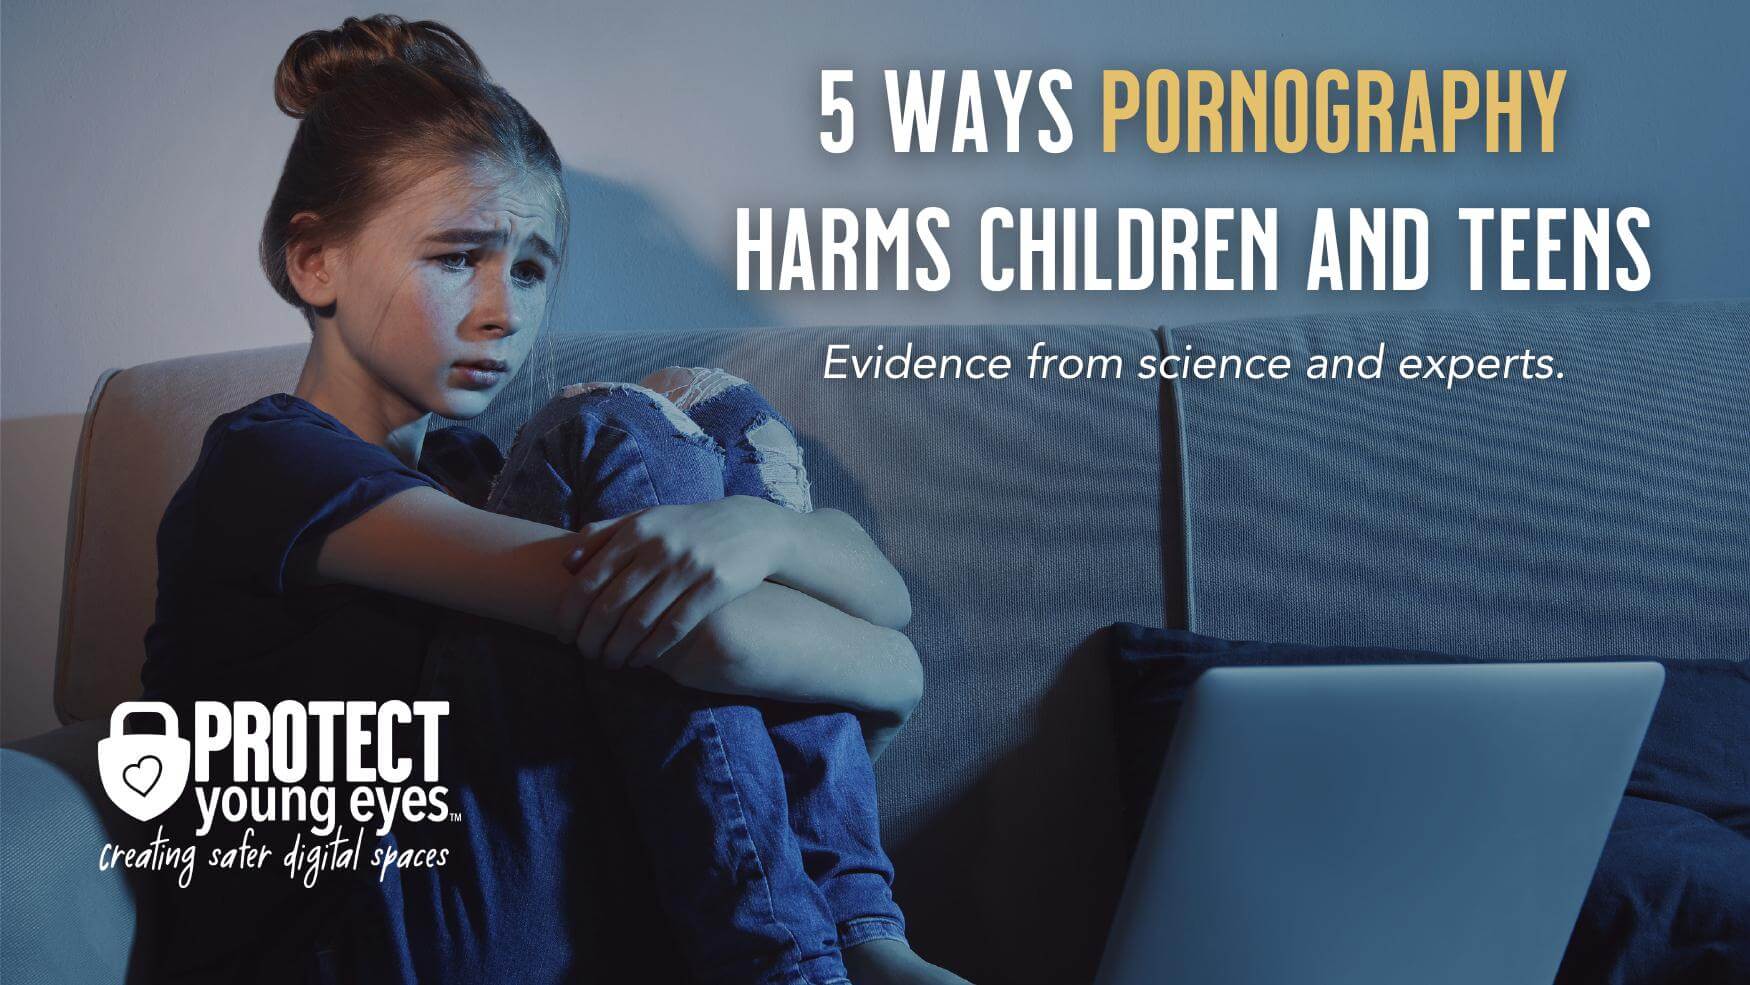 5 Ways Pornography Harms Children and Teens picture